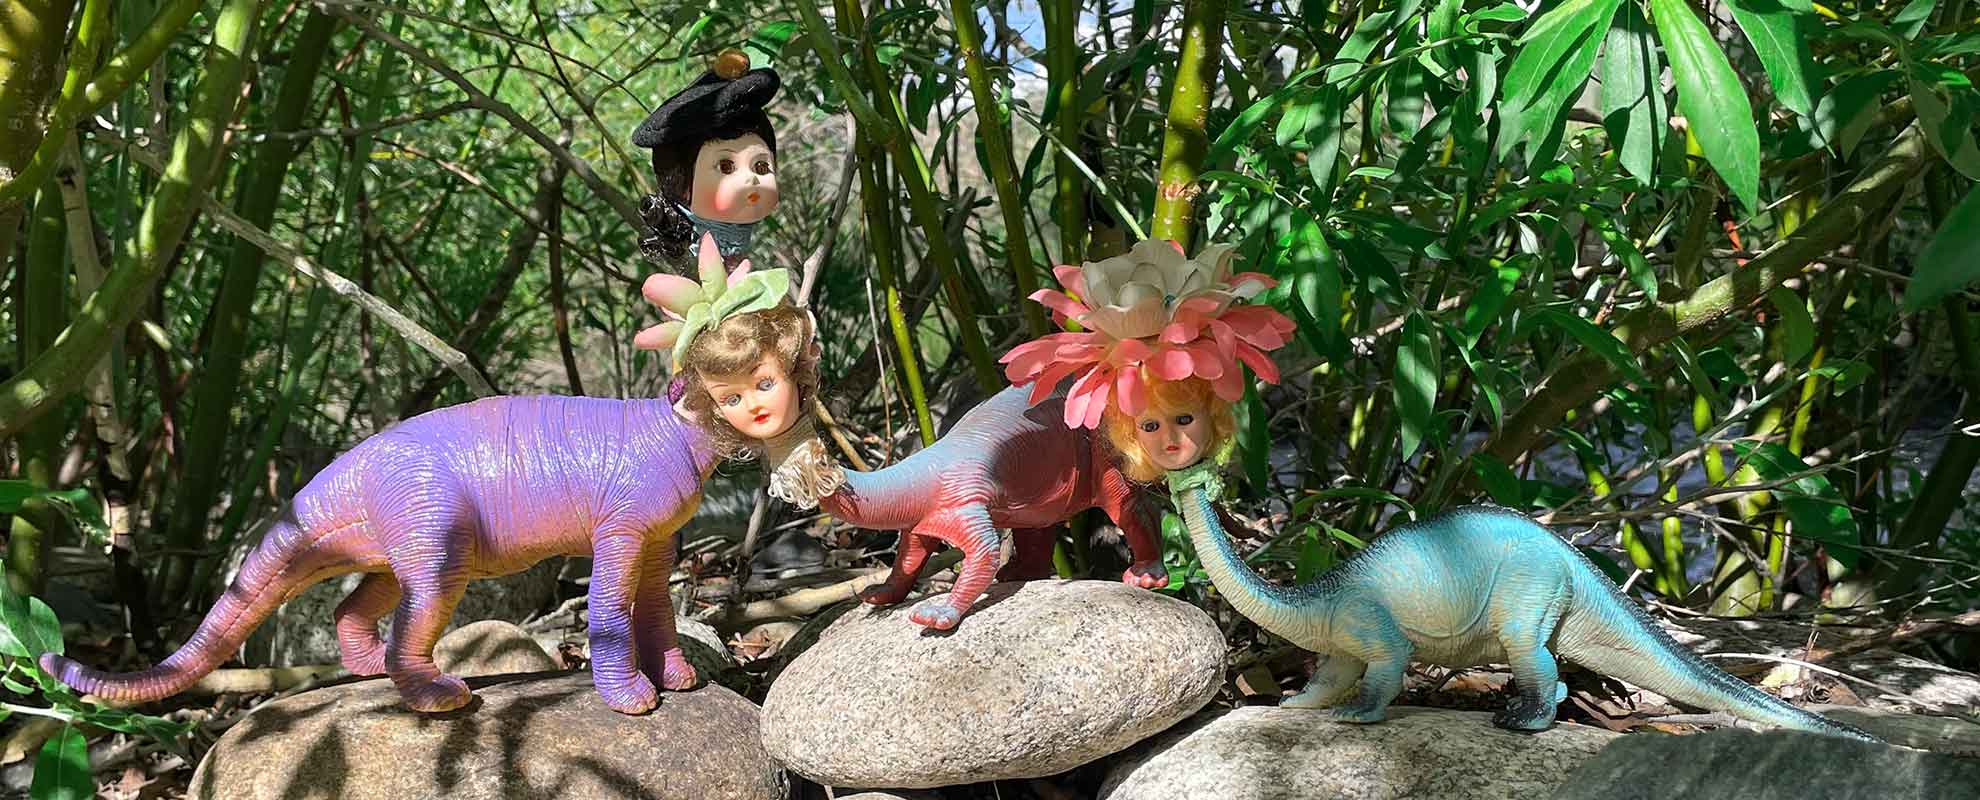 Three brontosaurs dolls with human heads wearing flowers as hats